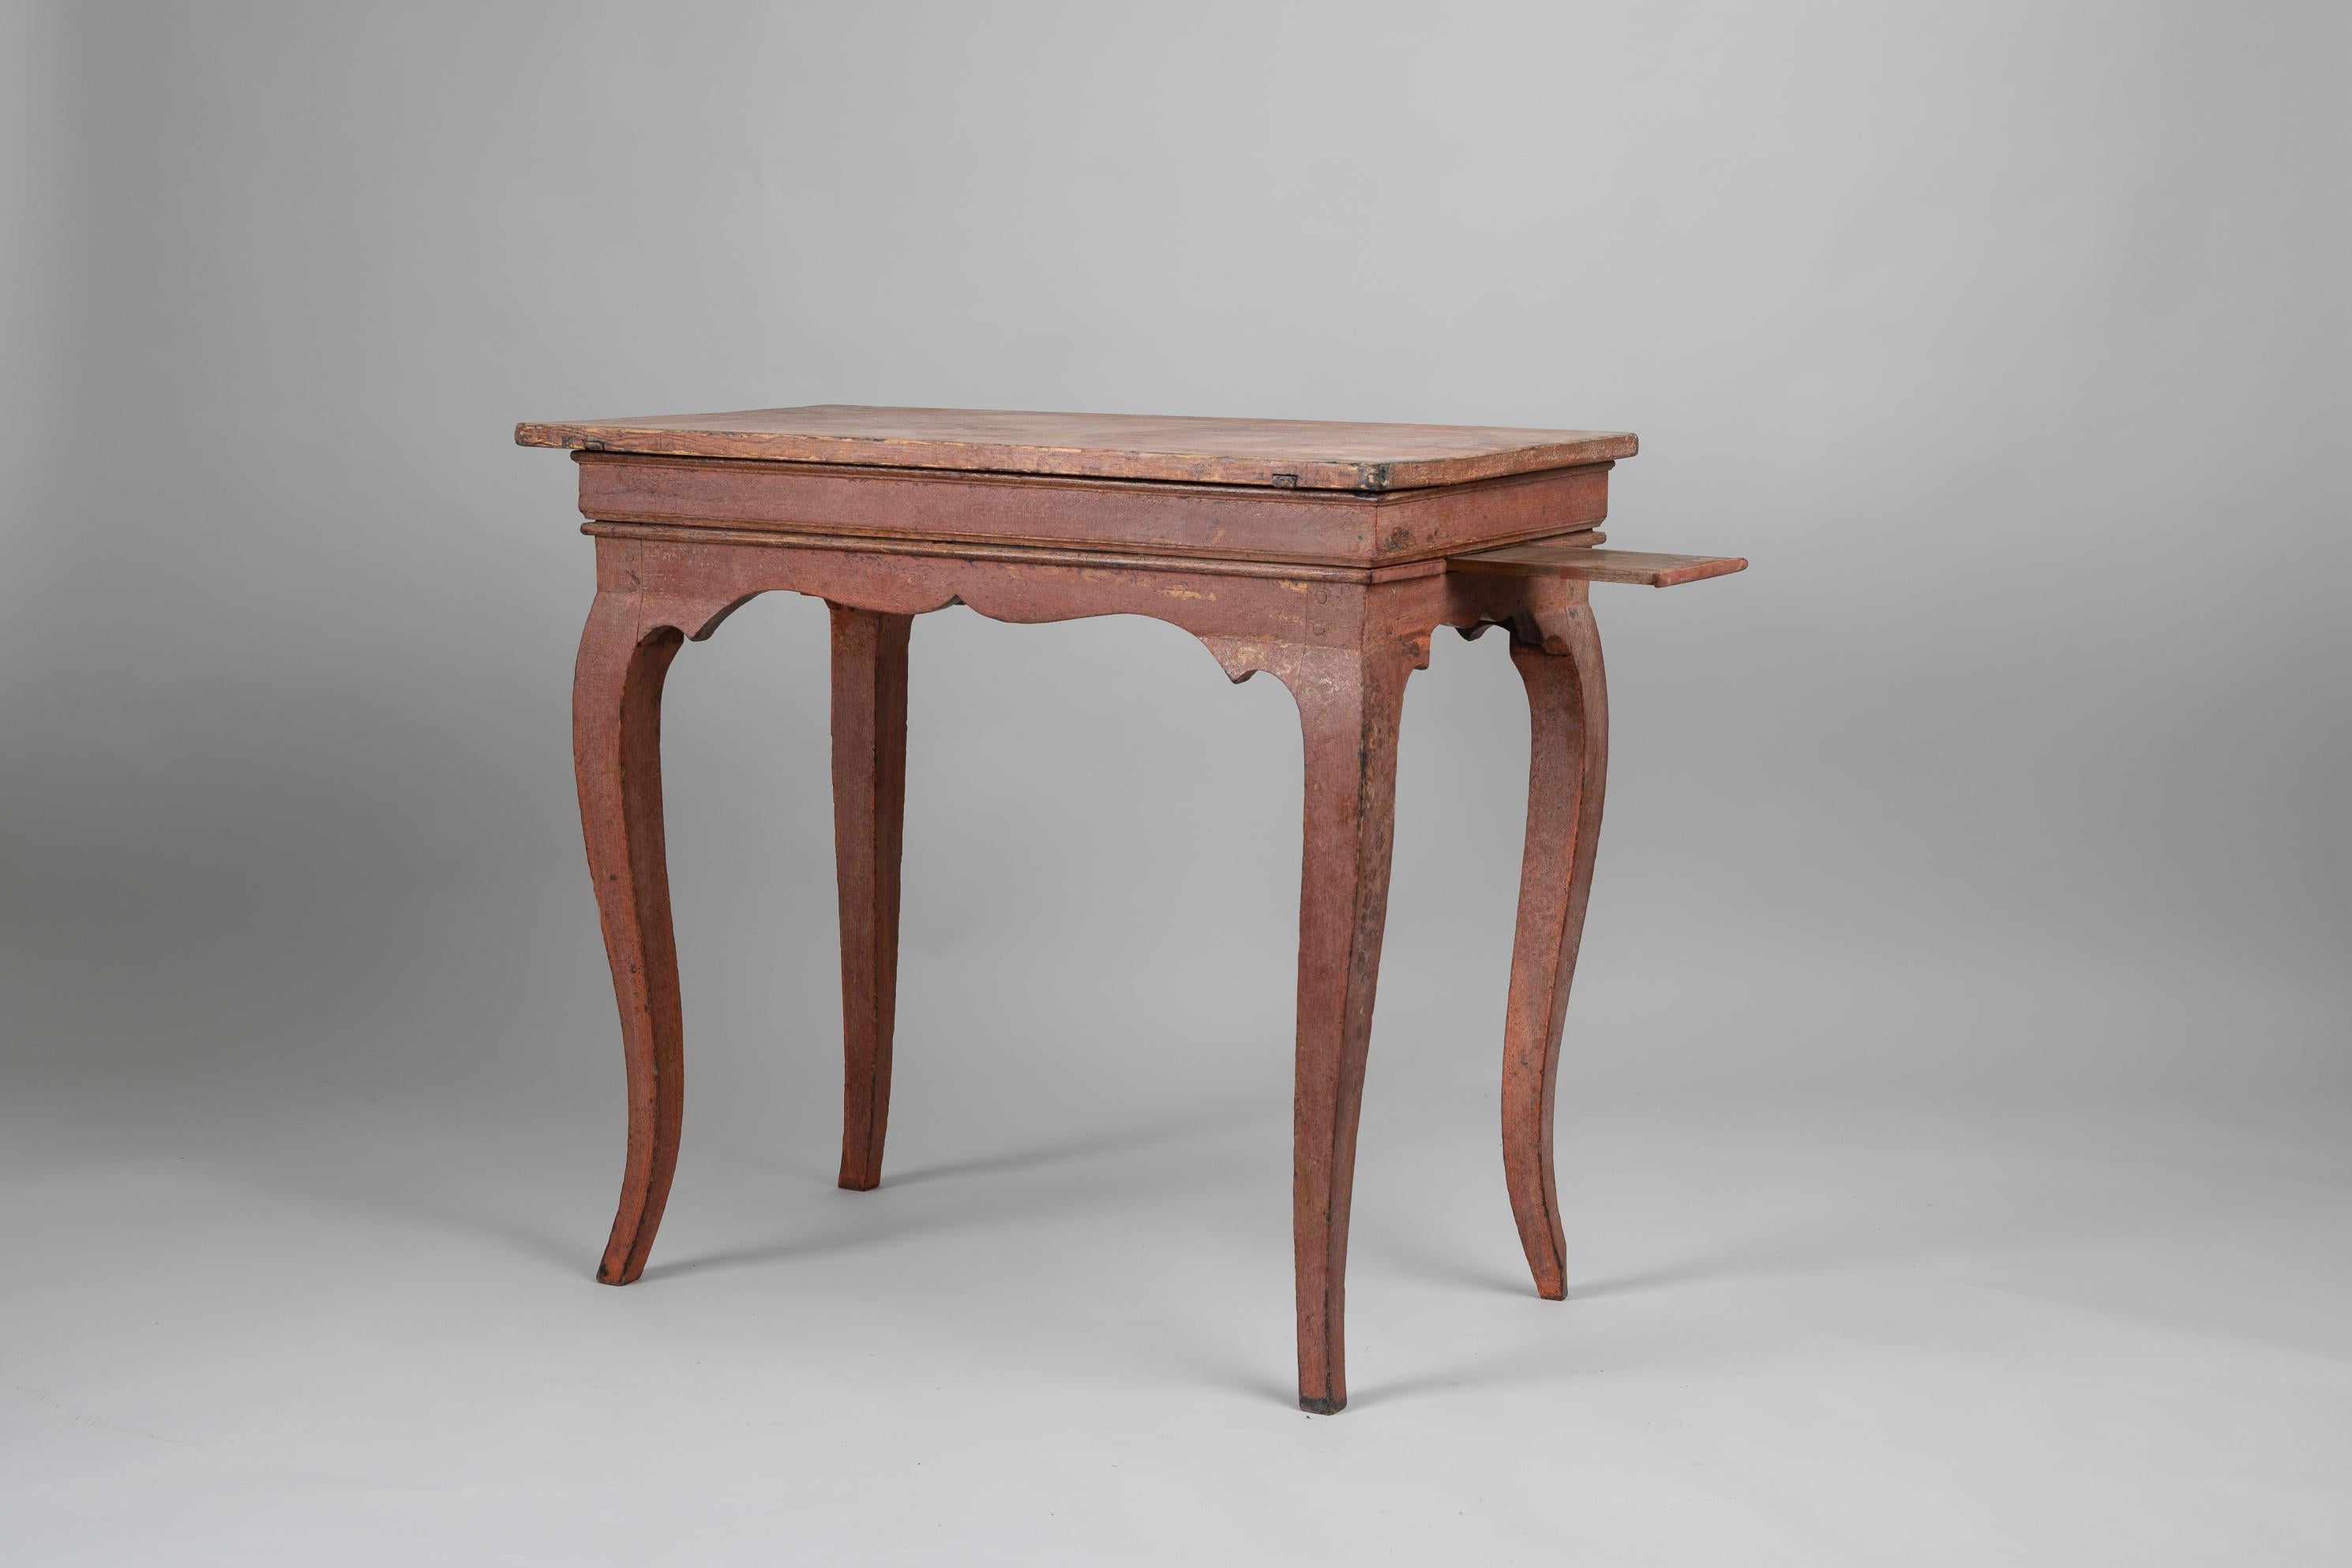 Hand-Crafted Genuine Swedish Rococo Table with Candle Trays